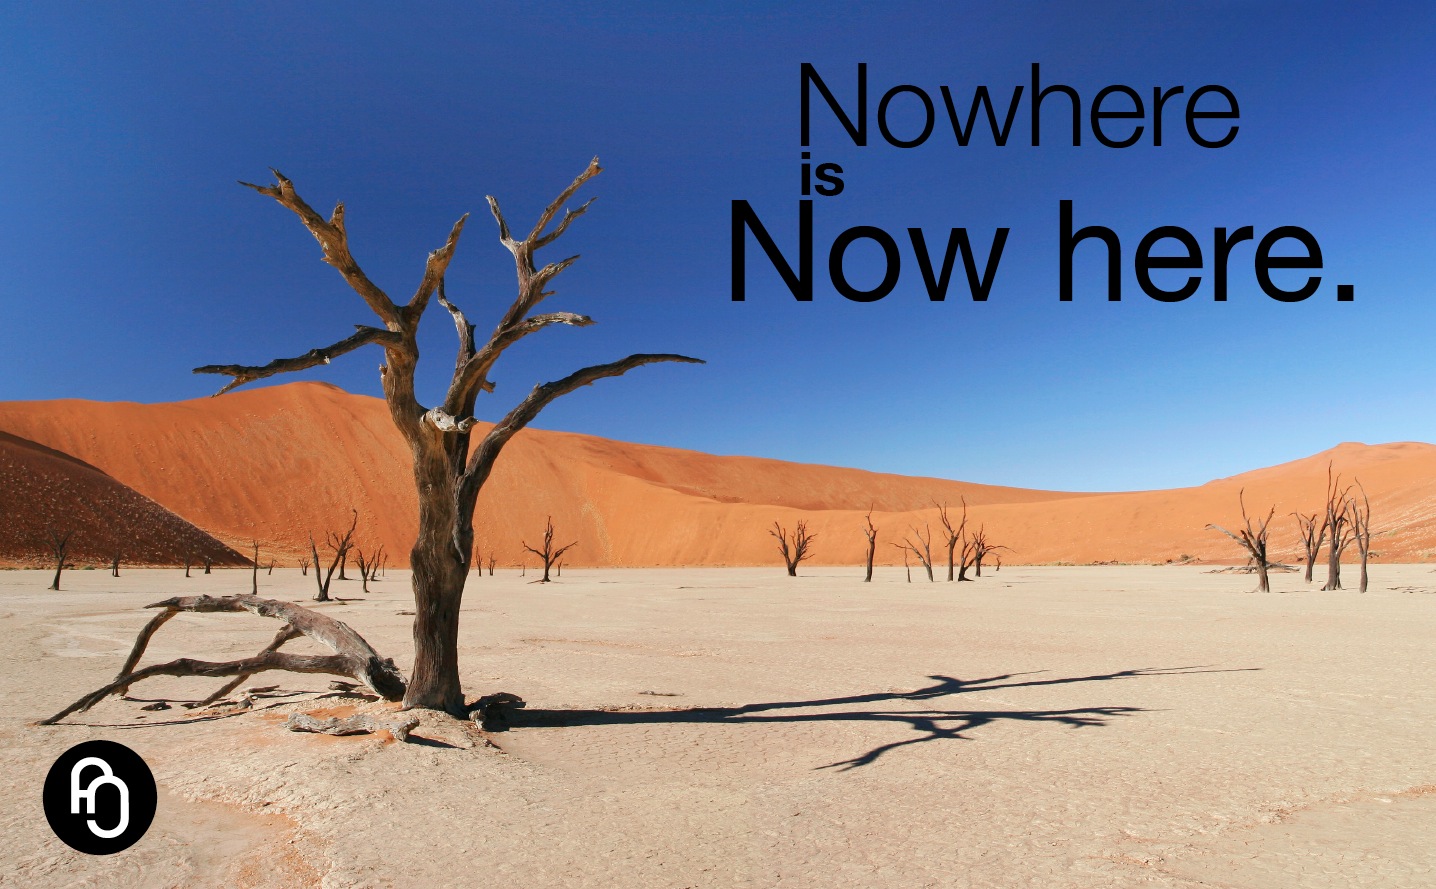 Nowhere = now here